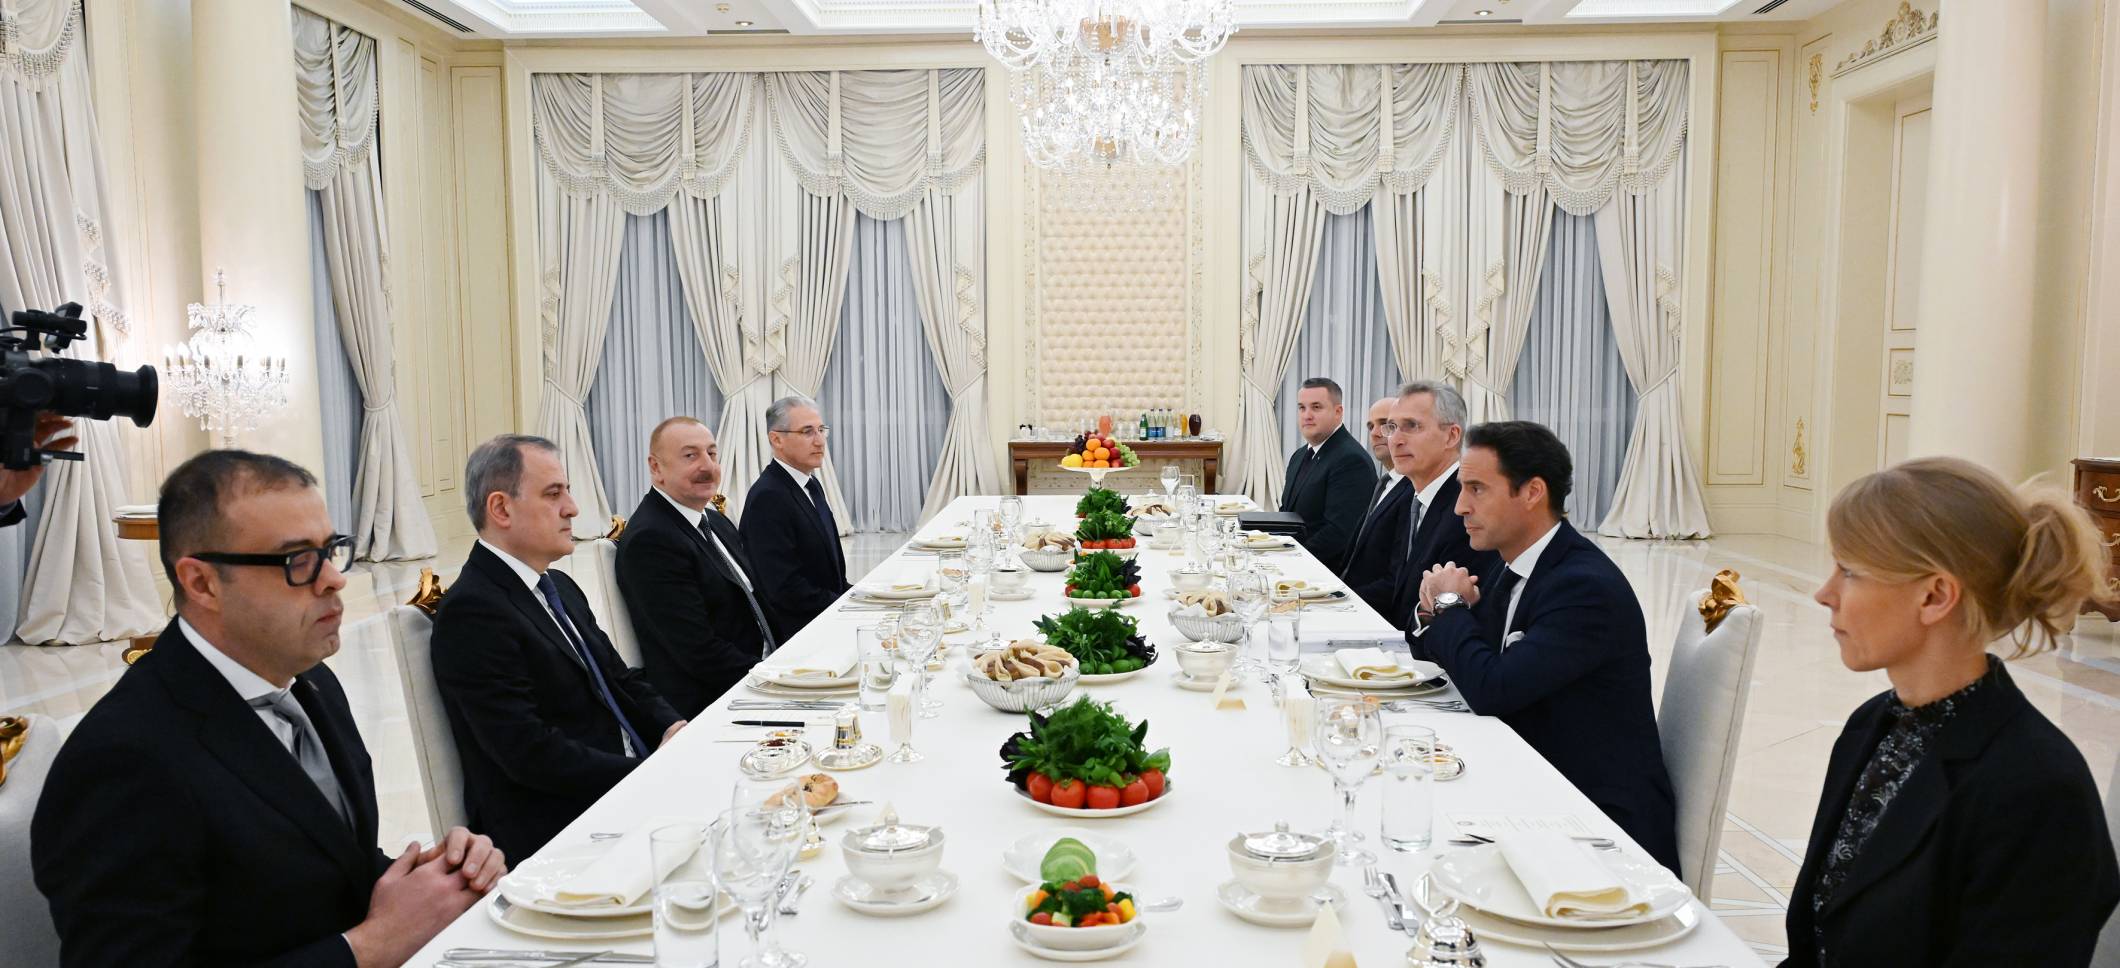 Ilham Aliyev held expanded meeting over dinner with NATO Secretary General Jens Stoltenberg